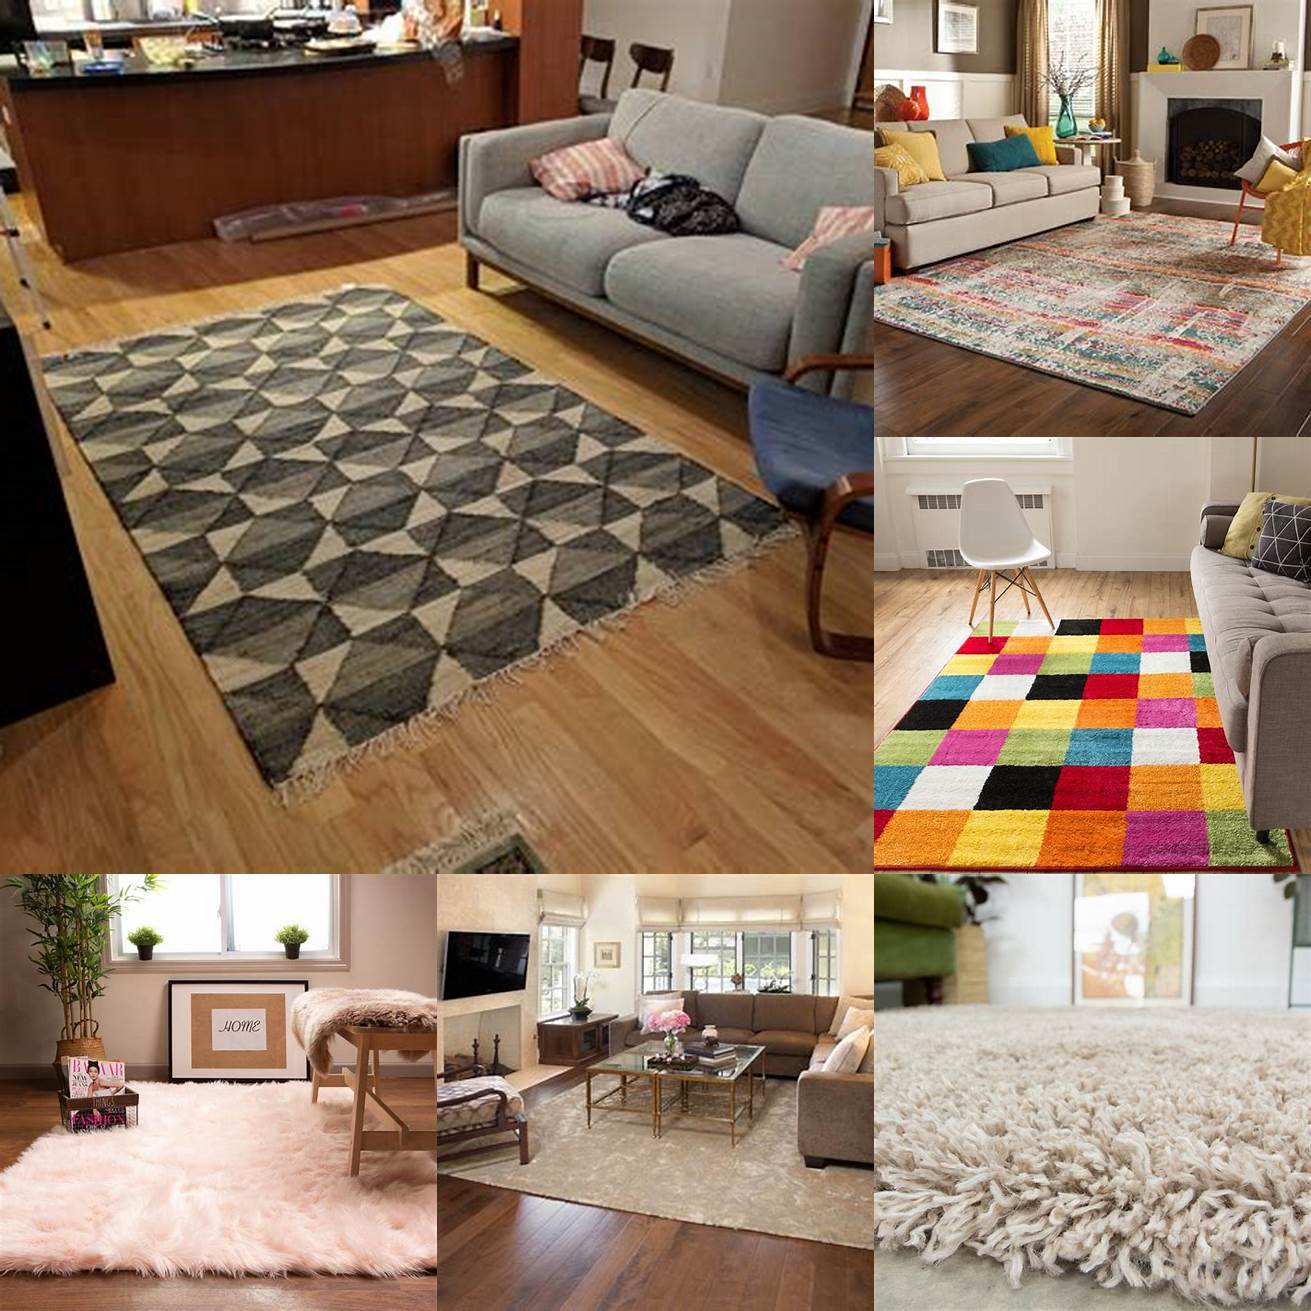 Make sure the rug is not too big or too small for the space